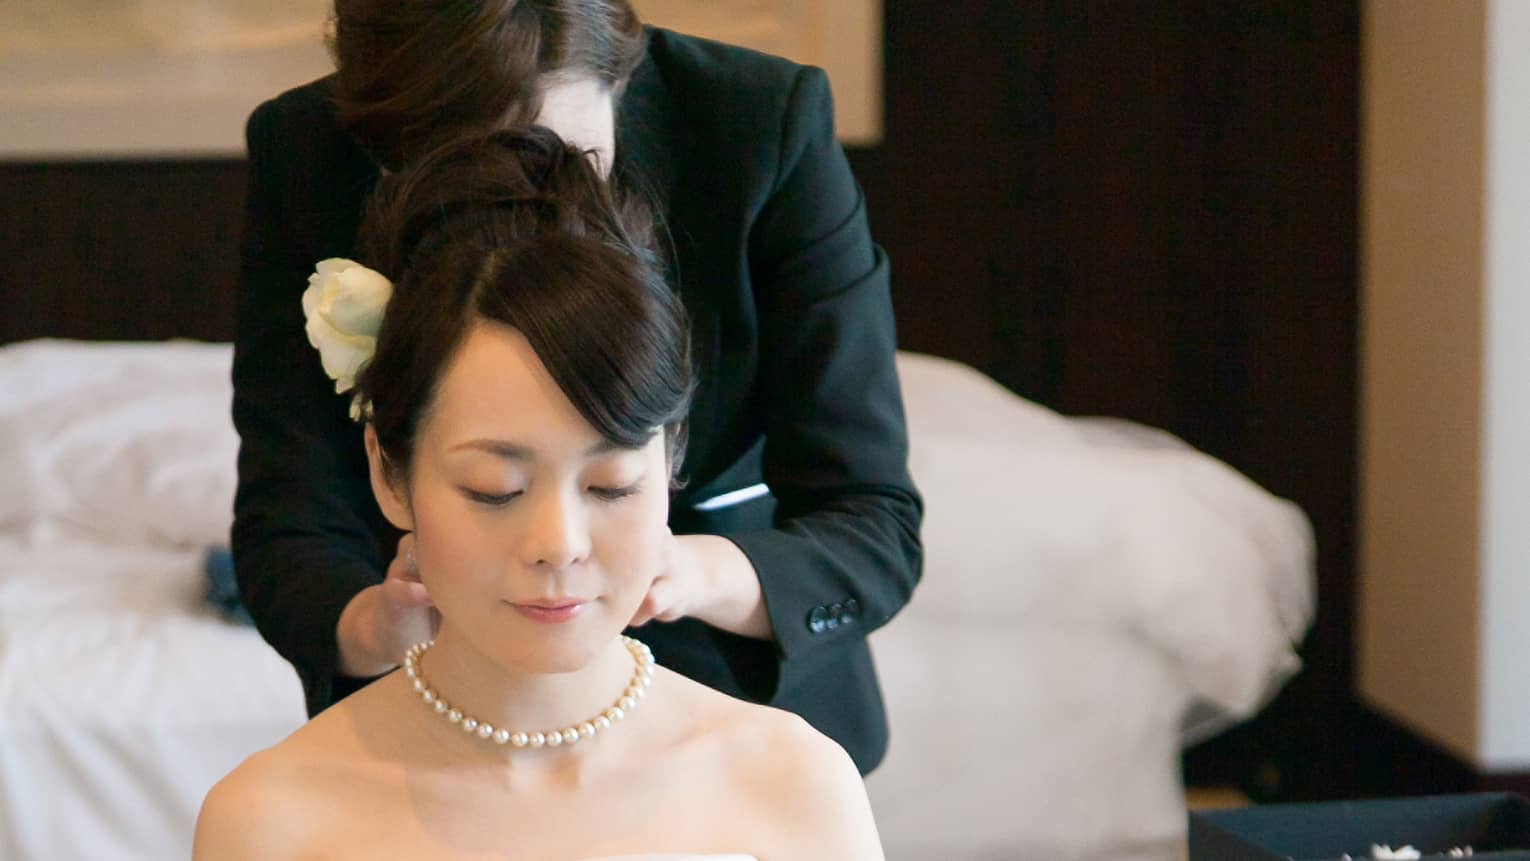 Hotel staff helps bride wearing wedding gown with her necklace in hotel room